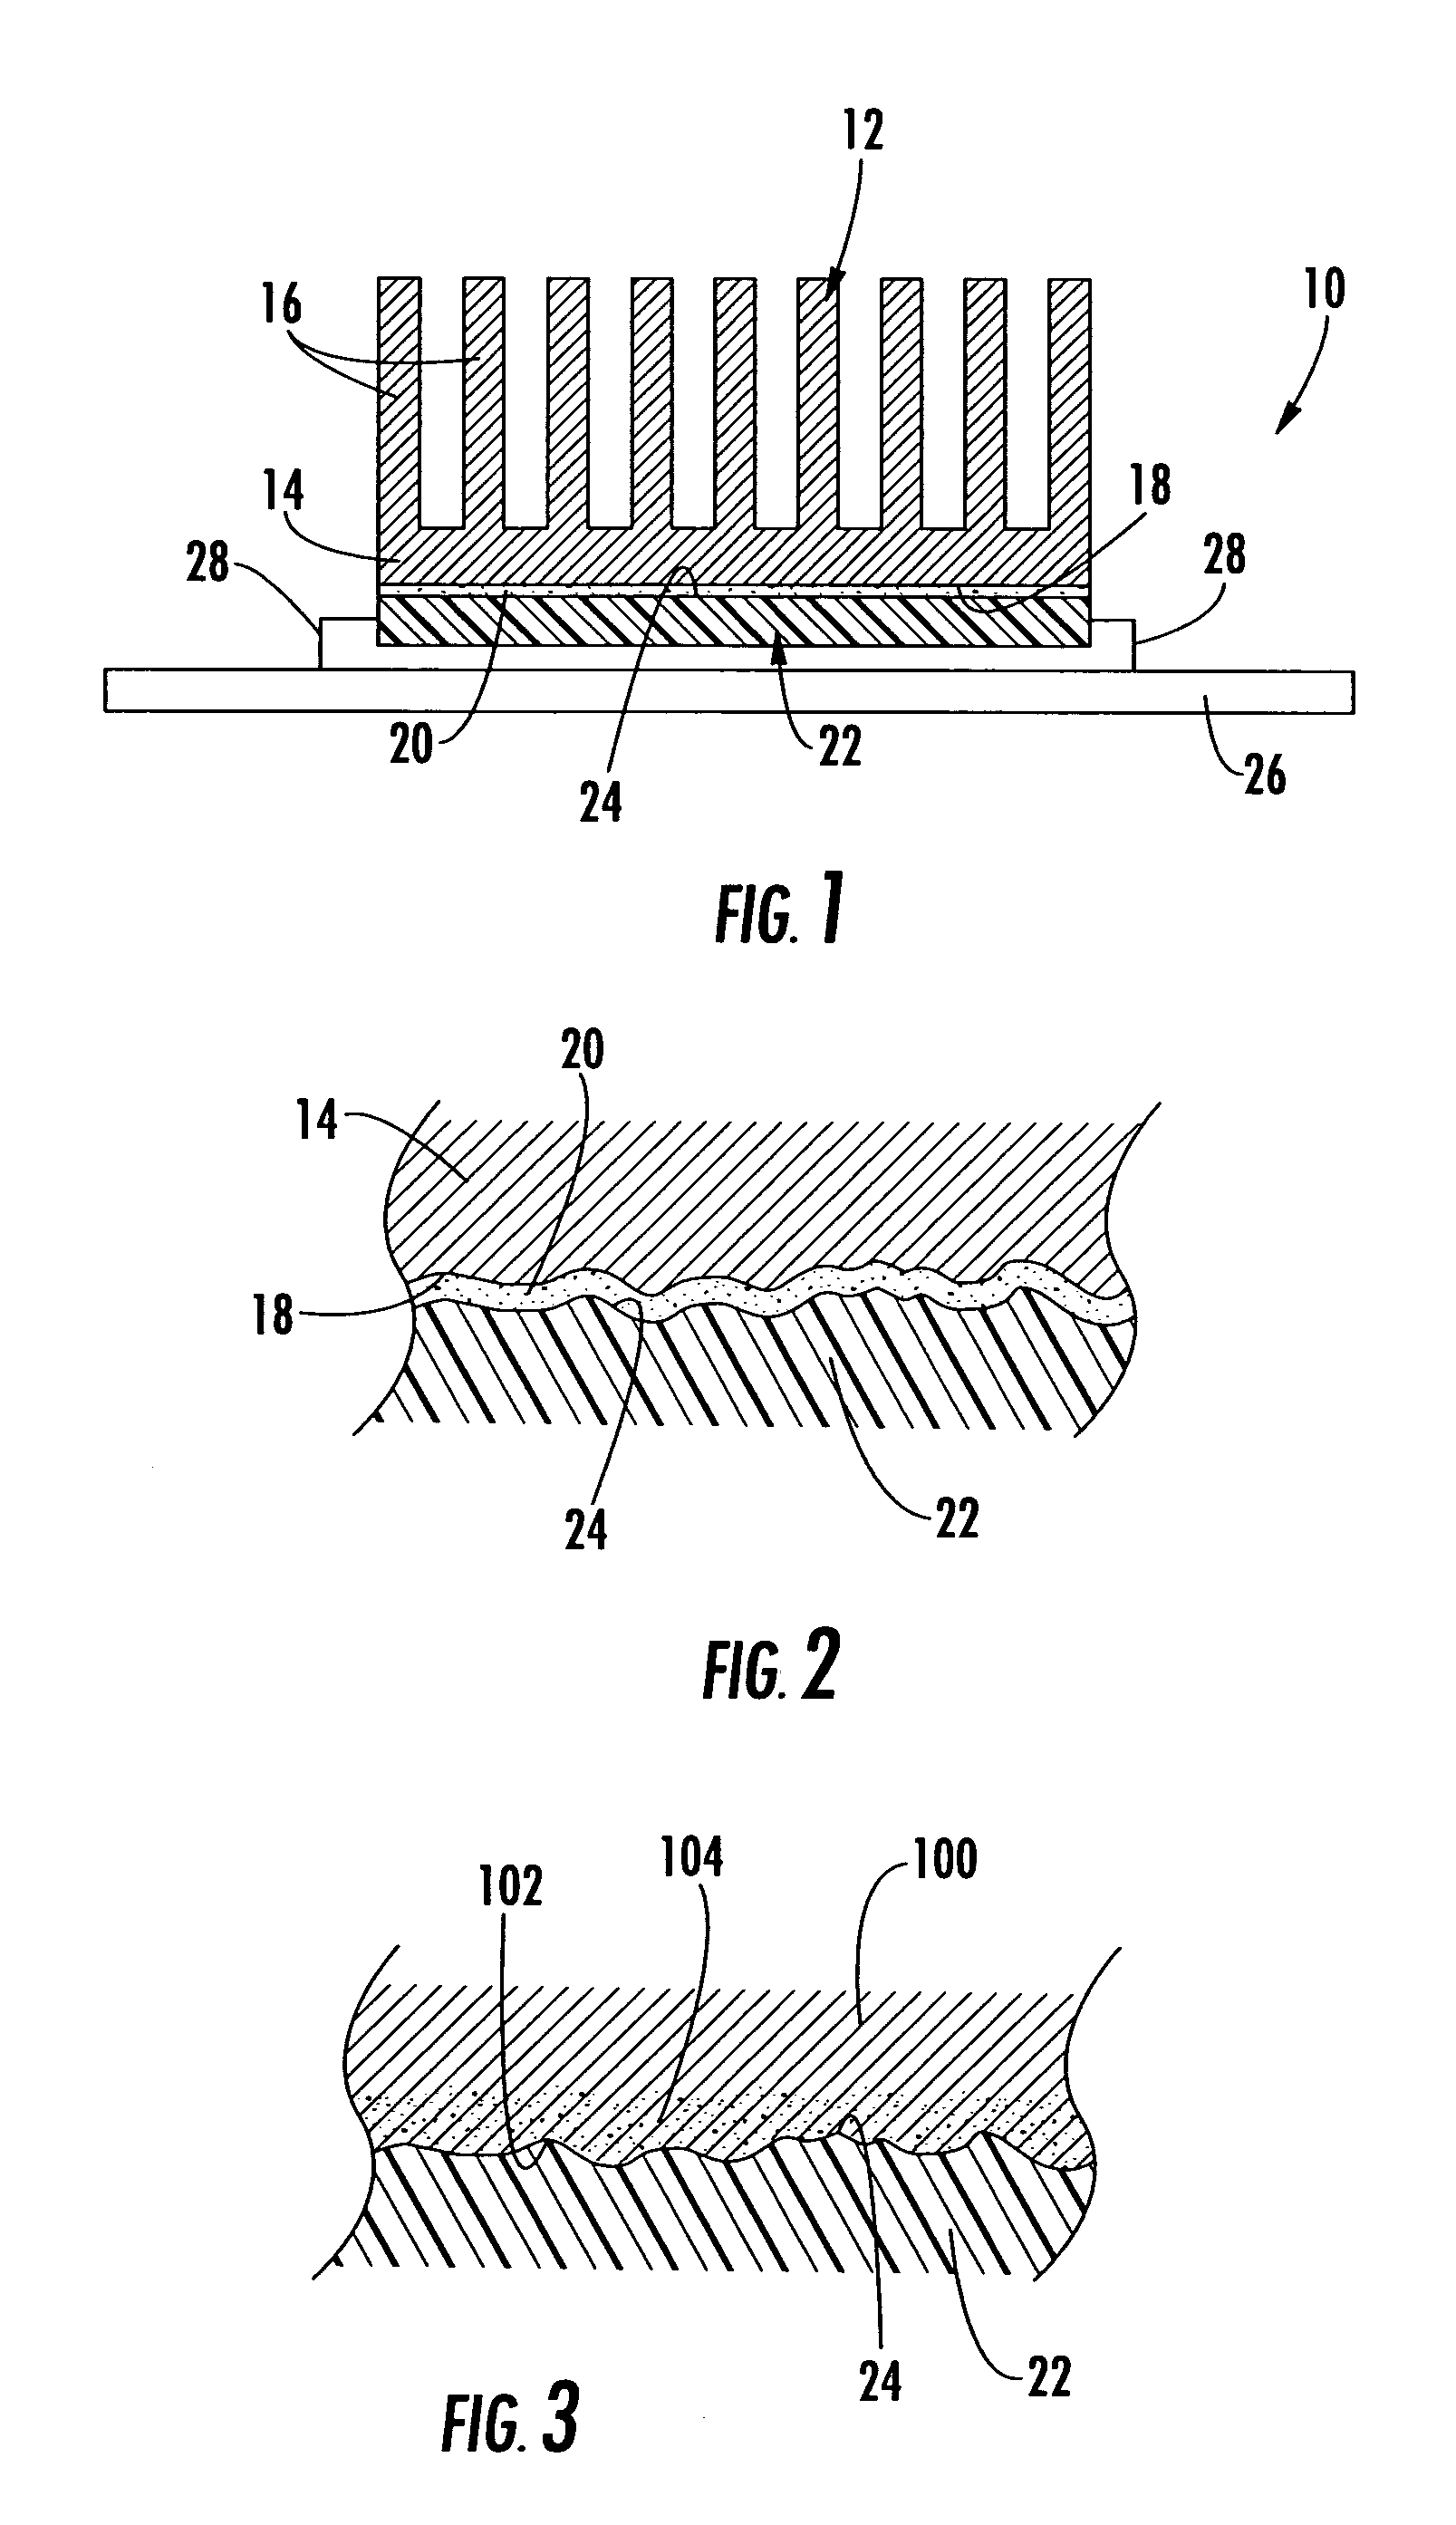 Elastomeric heat sink with a pressure sensitive adhesive backing